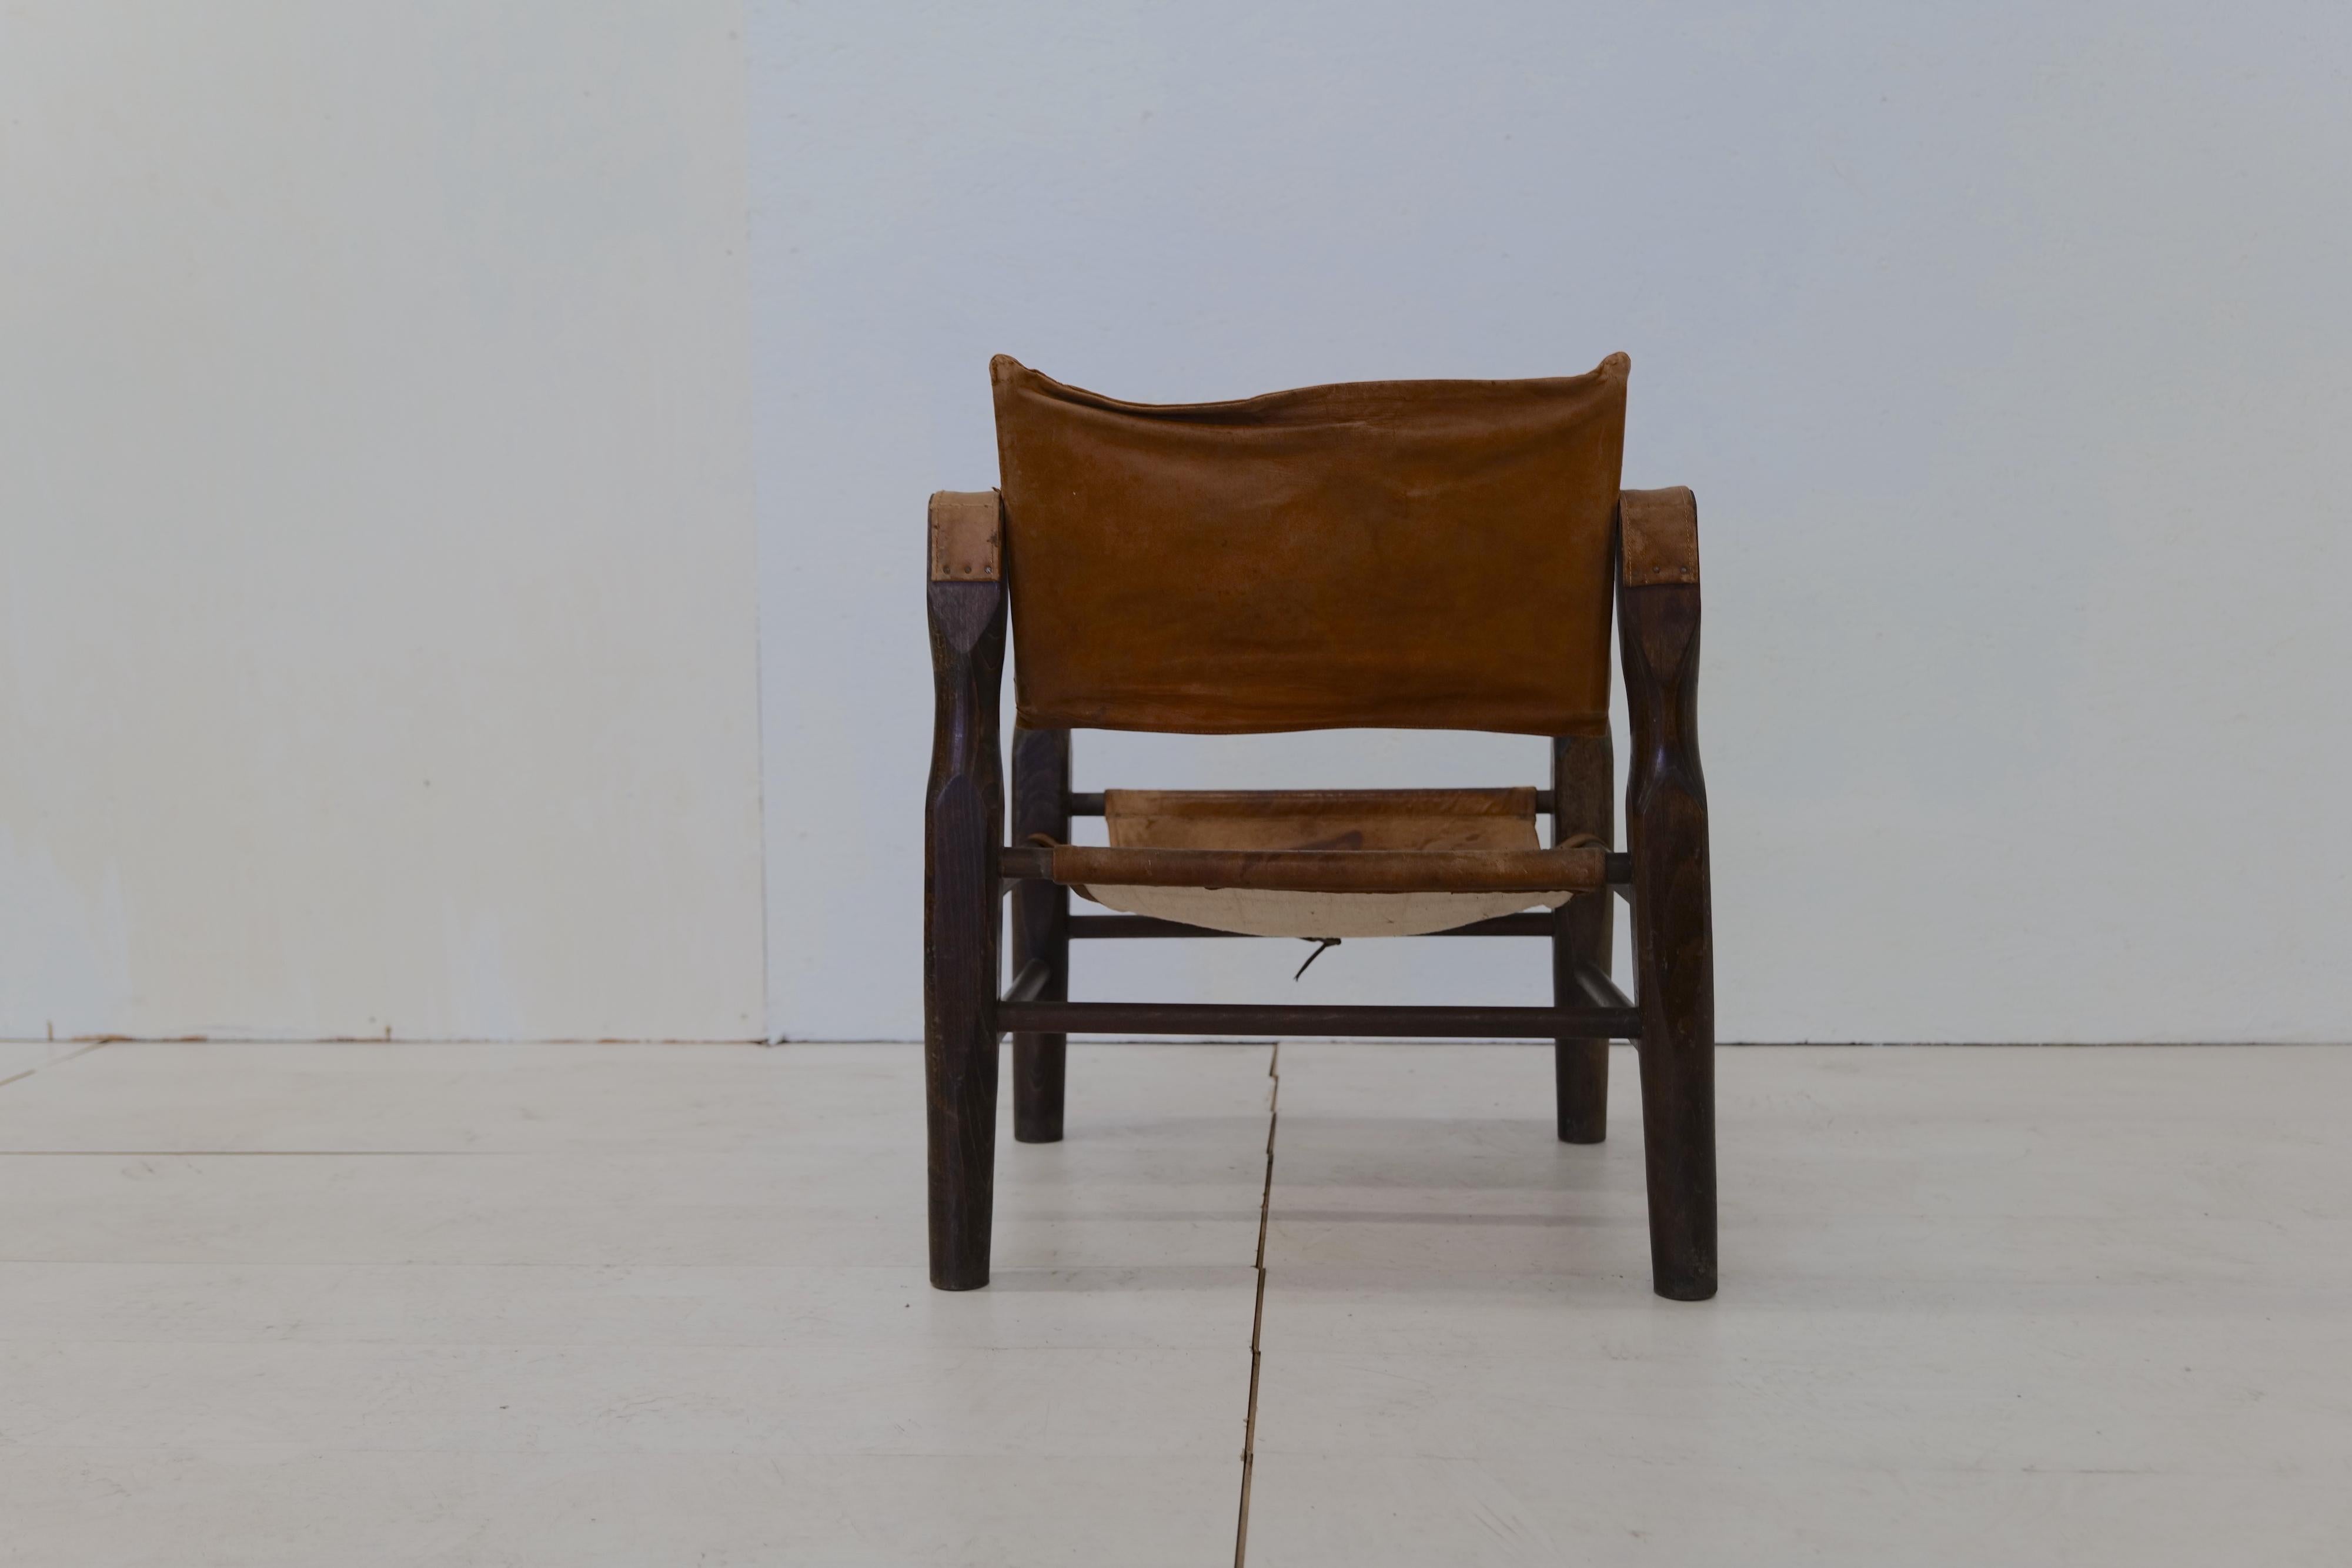 Vintage Italian Leather and Wood Safari Chair, 1970s For Sale 4